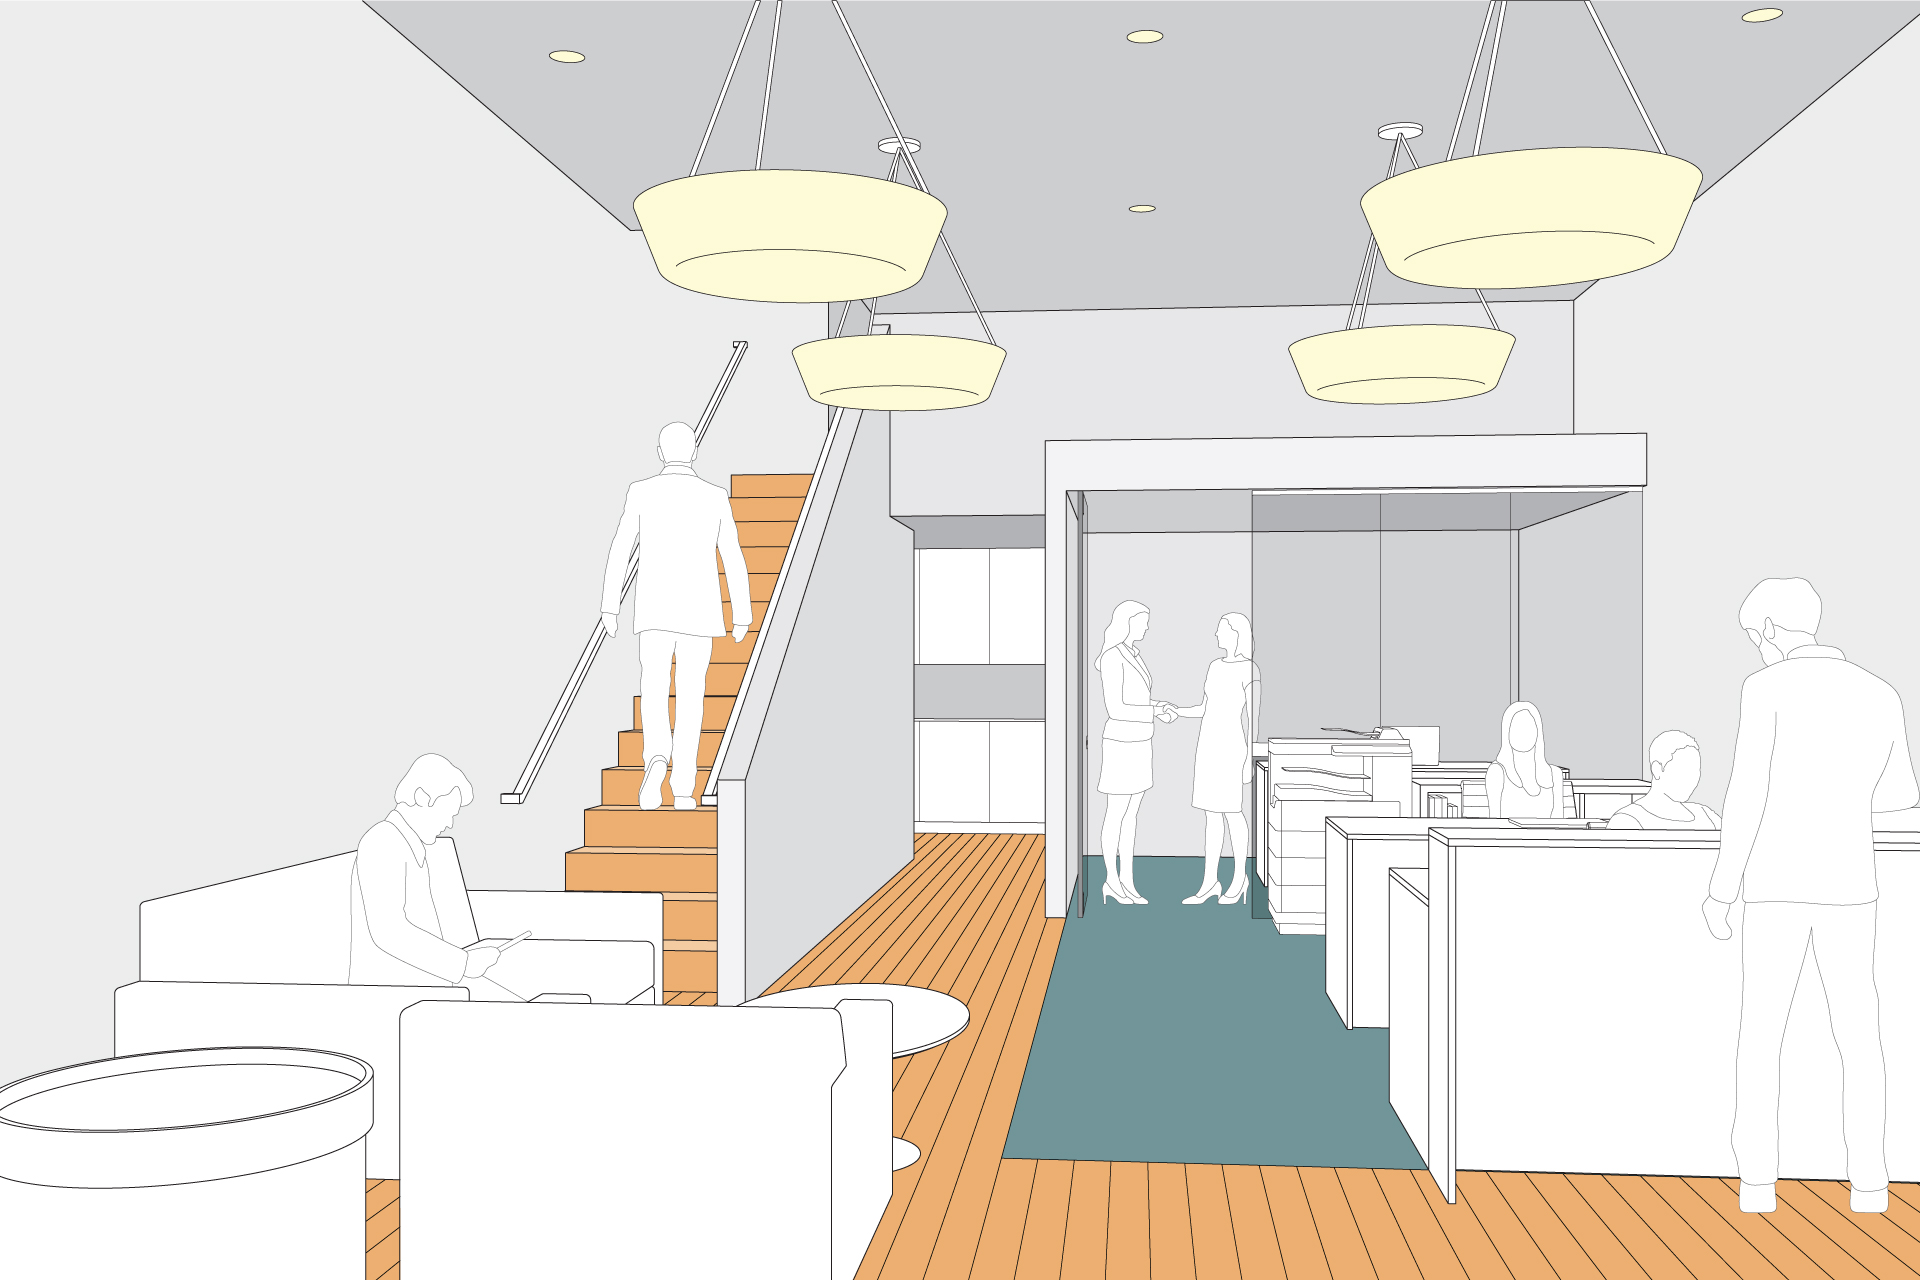 This is a 3d drawing of the interior of the Multnomah Real Estate office.